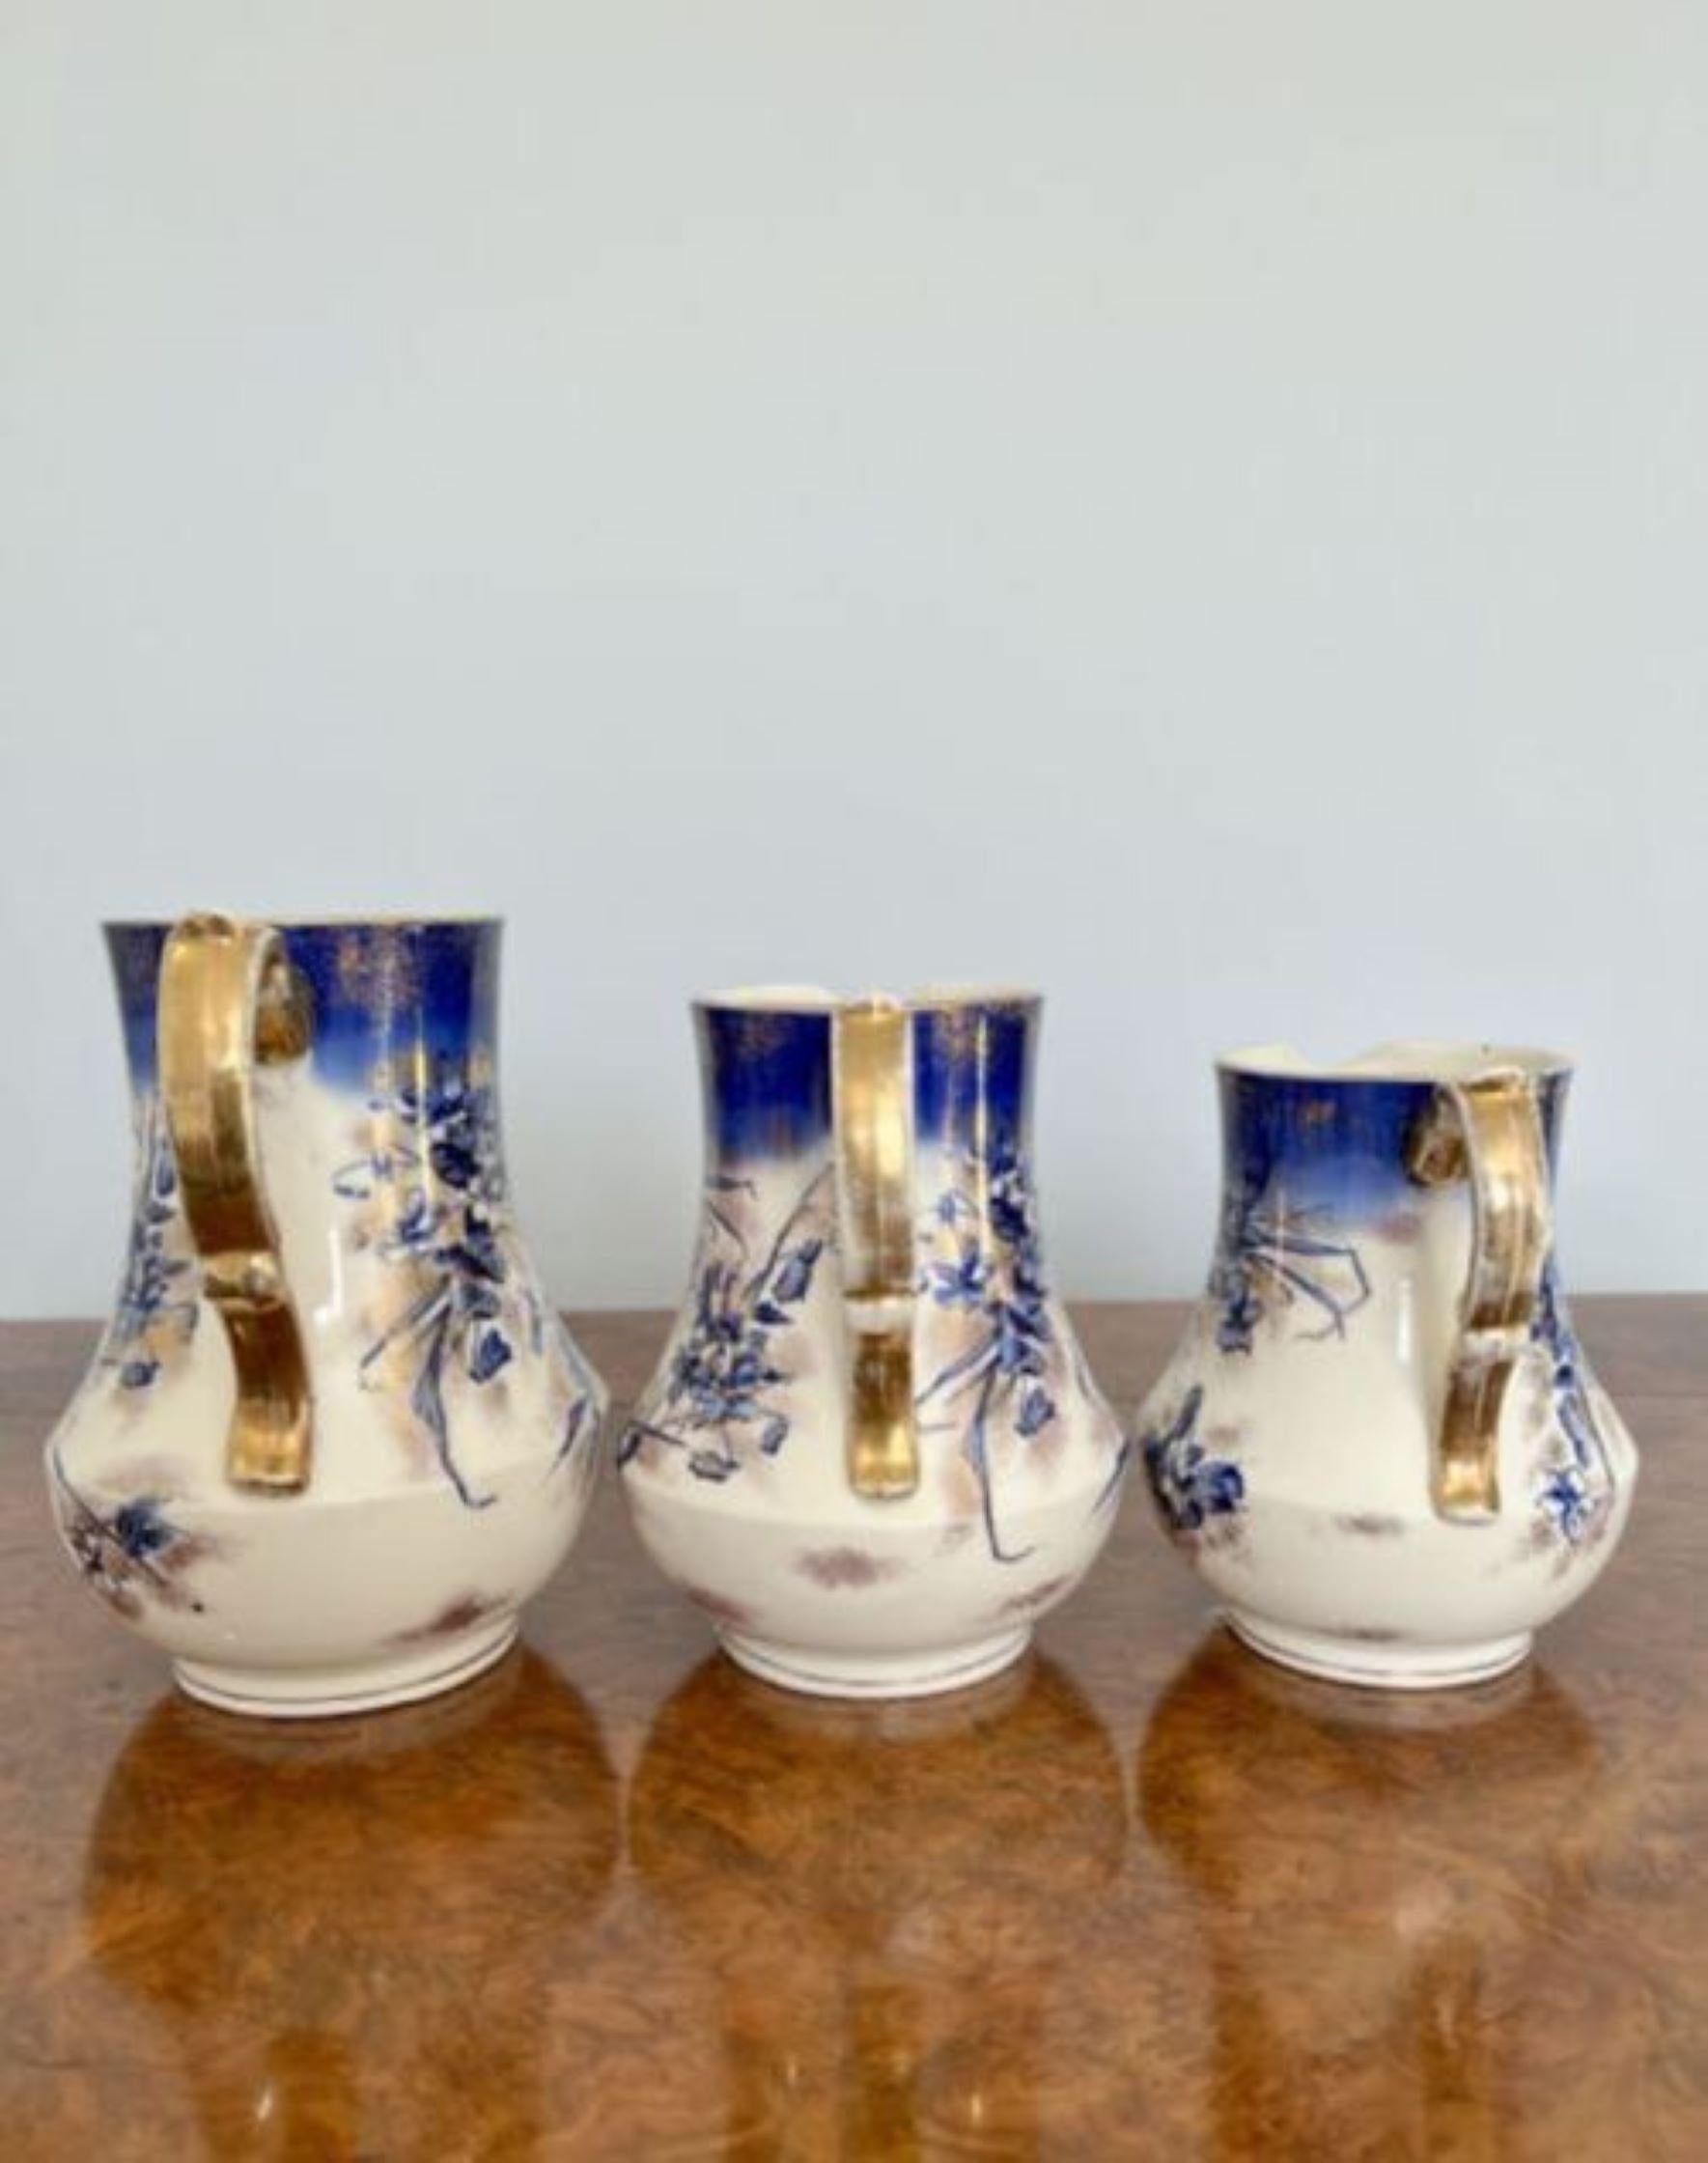 Set of three antique Edwardian jugs having shaped handles and quality hand painted decoration in blue, gold and white colours. Stamped Late Mayers 